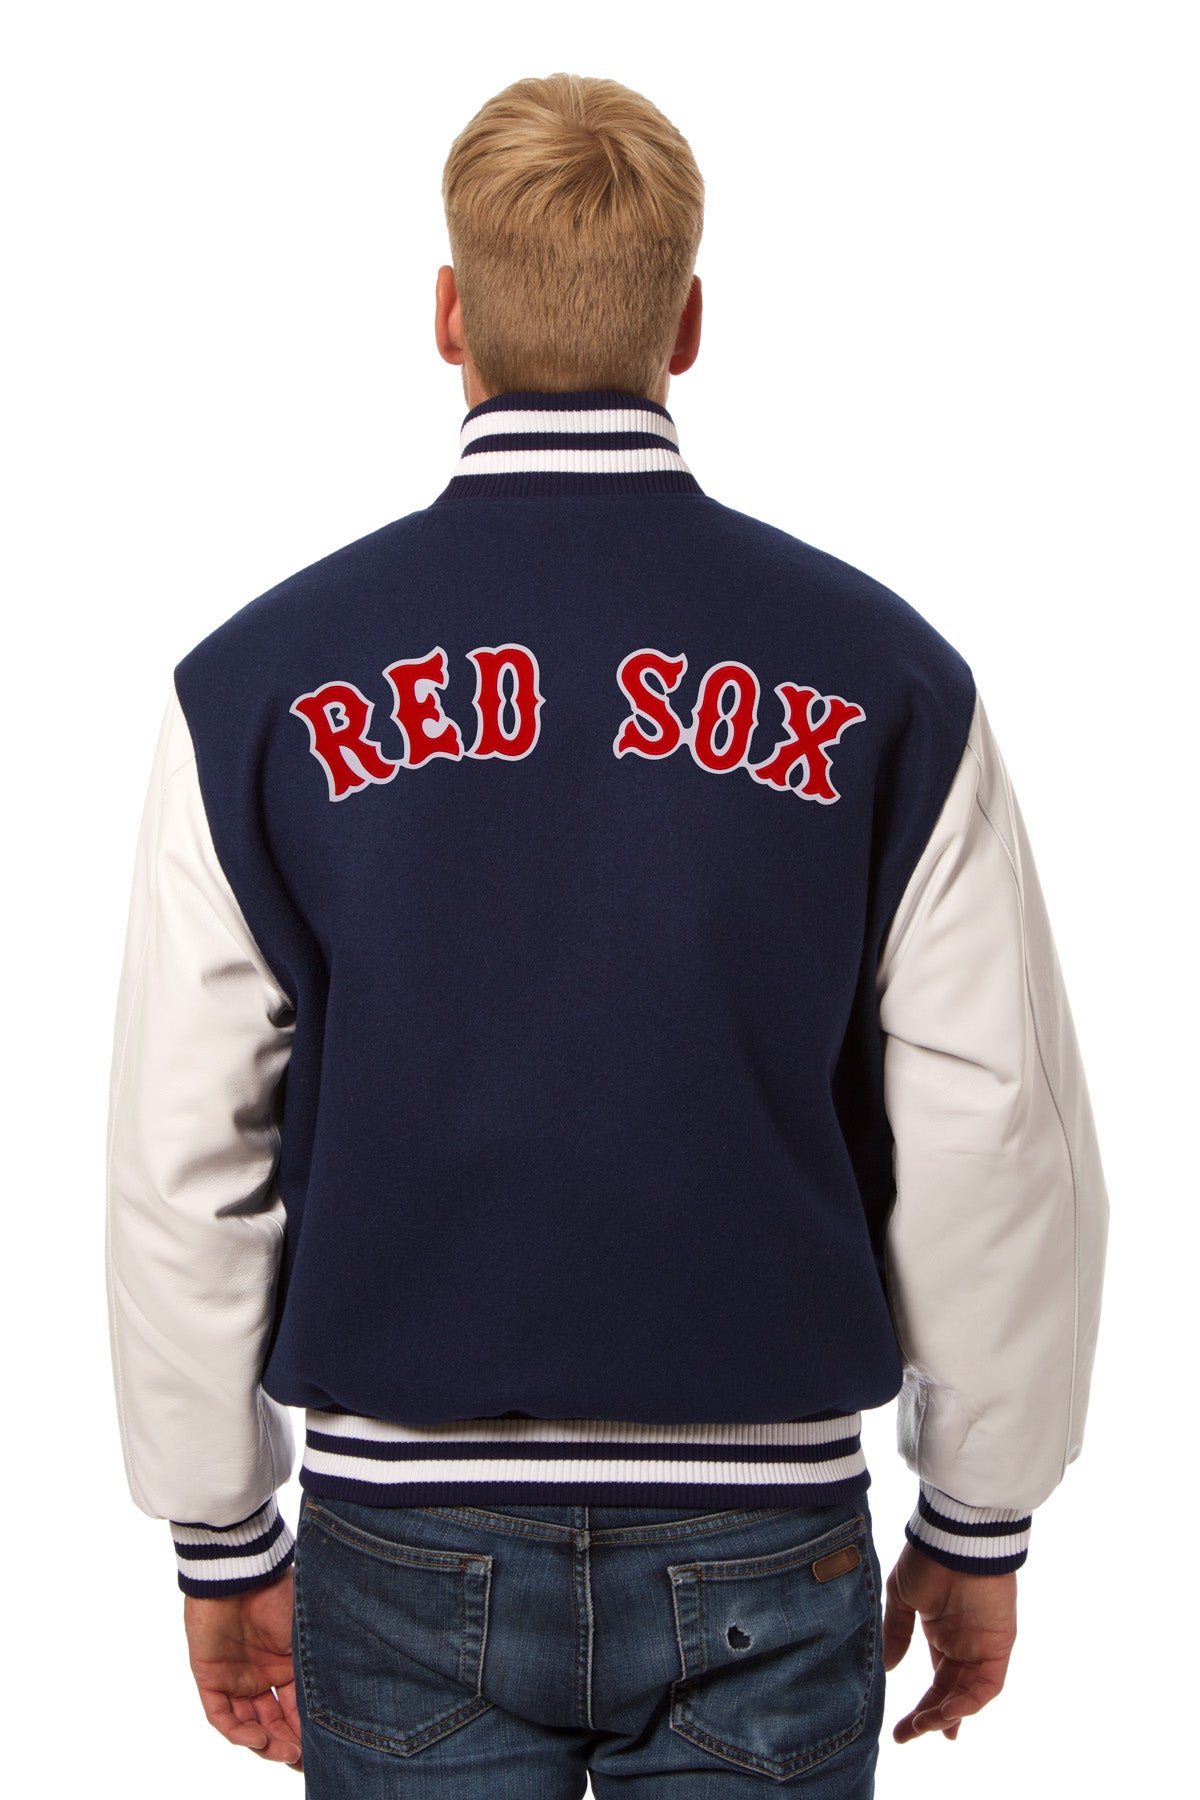 Boston Red Sox Embroidered Wool and Leather Jacket